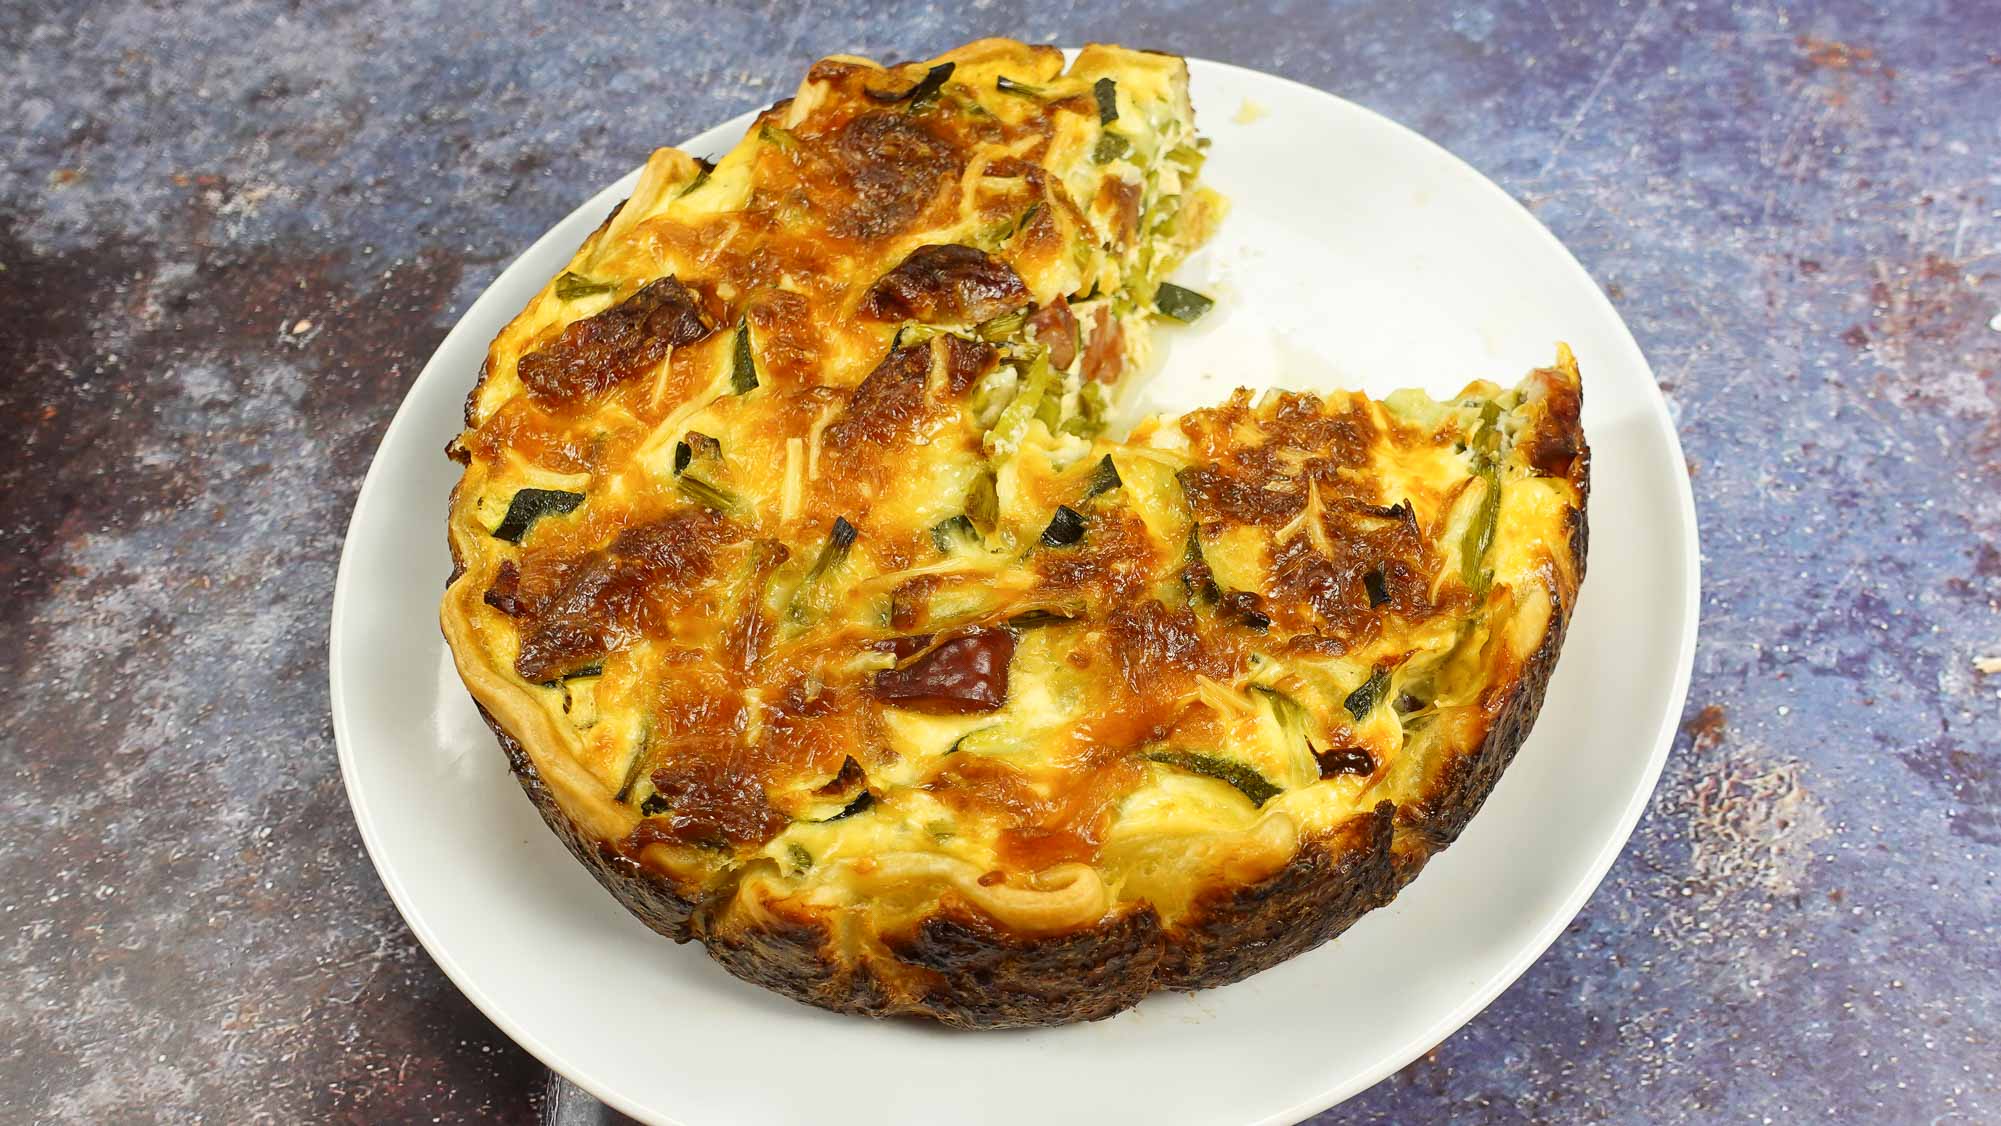 Well shaped round quiche with veggies in soft golden dough.